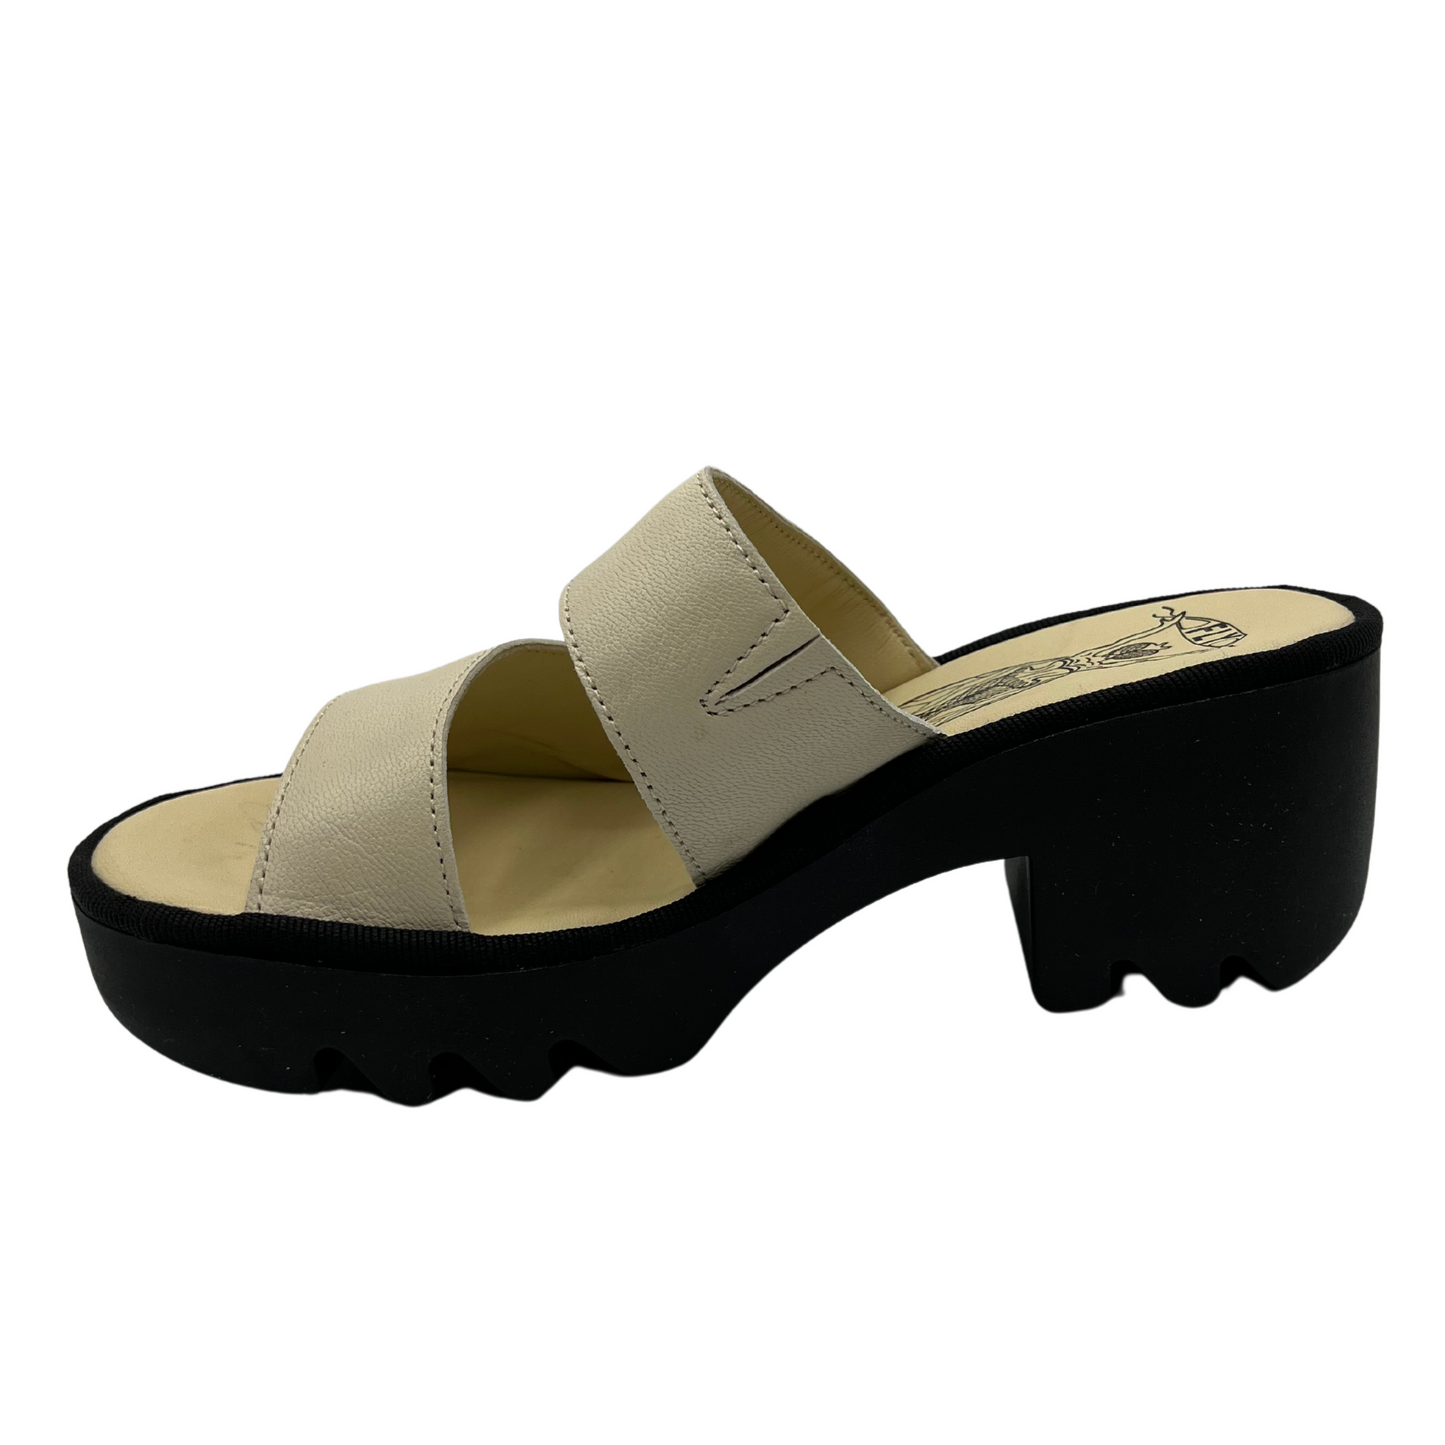 Left facing view of off white leather sandal with chunky black rubber outsole